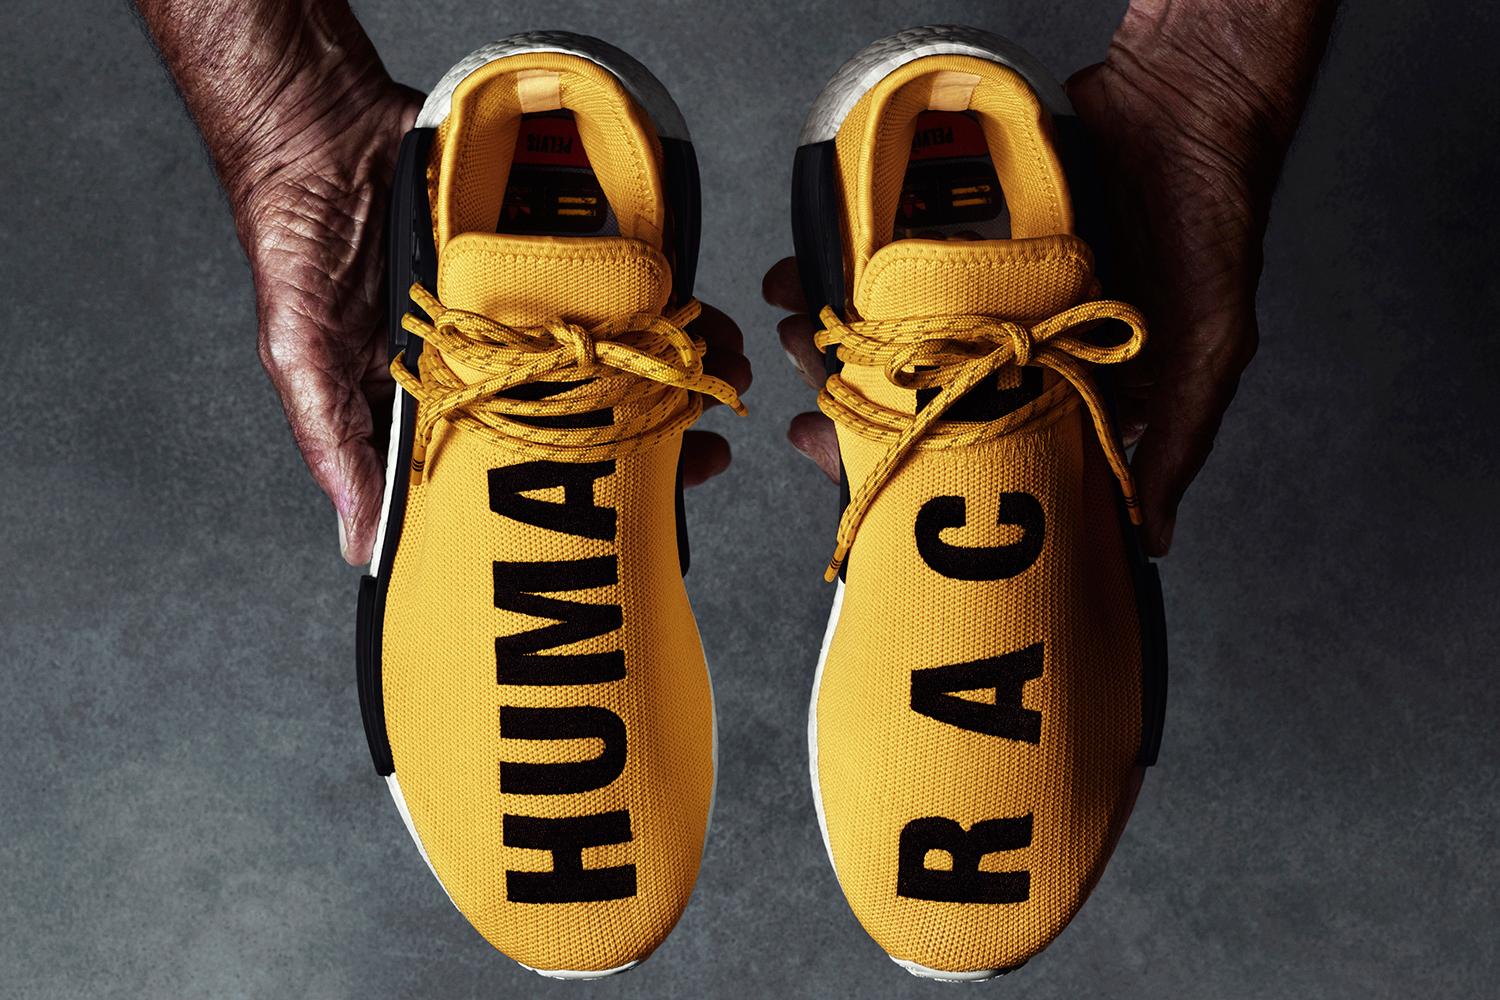 Pharrell x Adidas NMD Human Race Limited Edition Sneakers Out Now